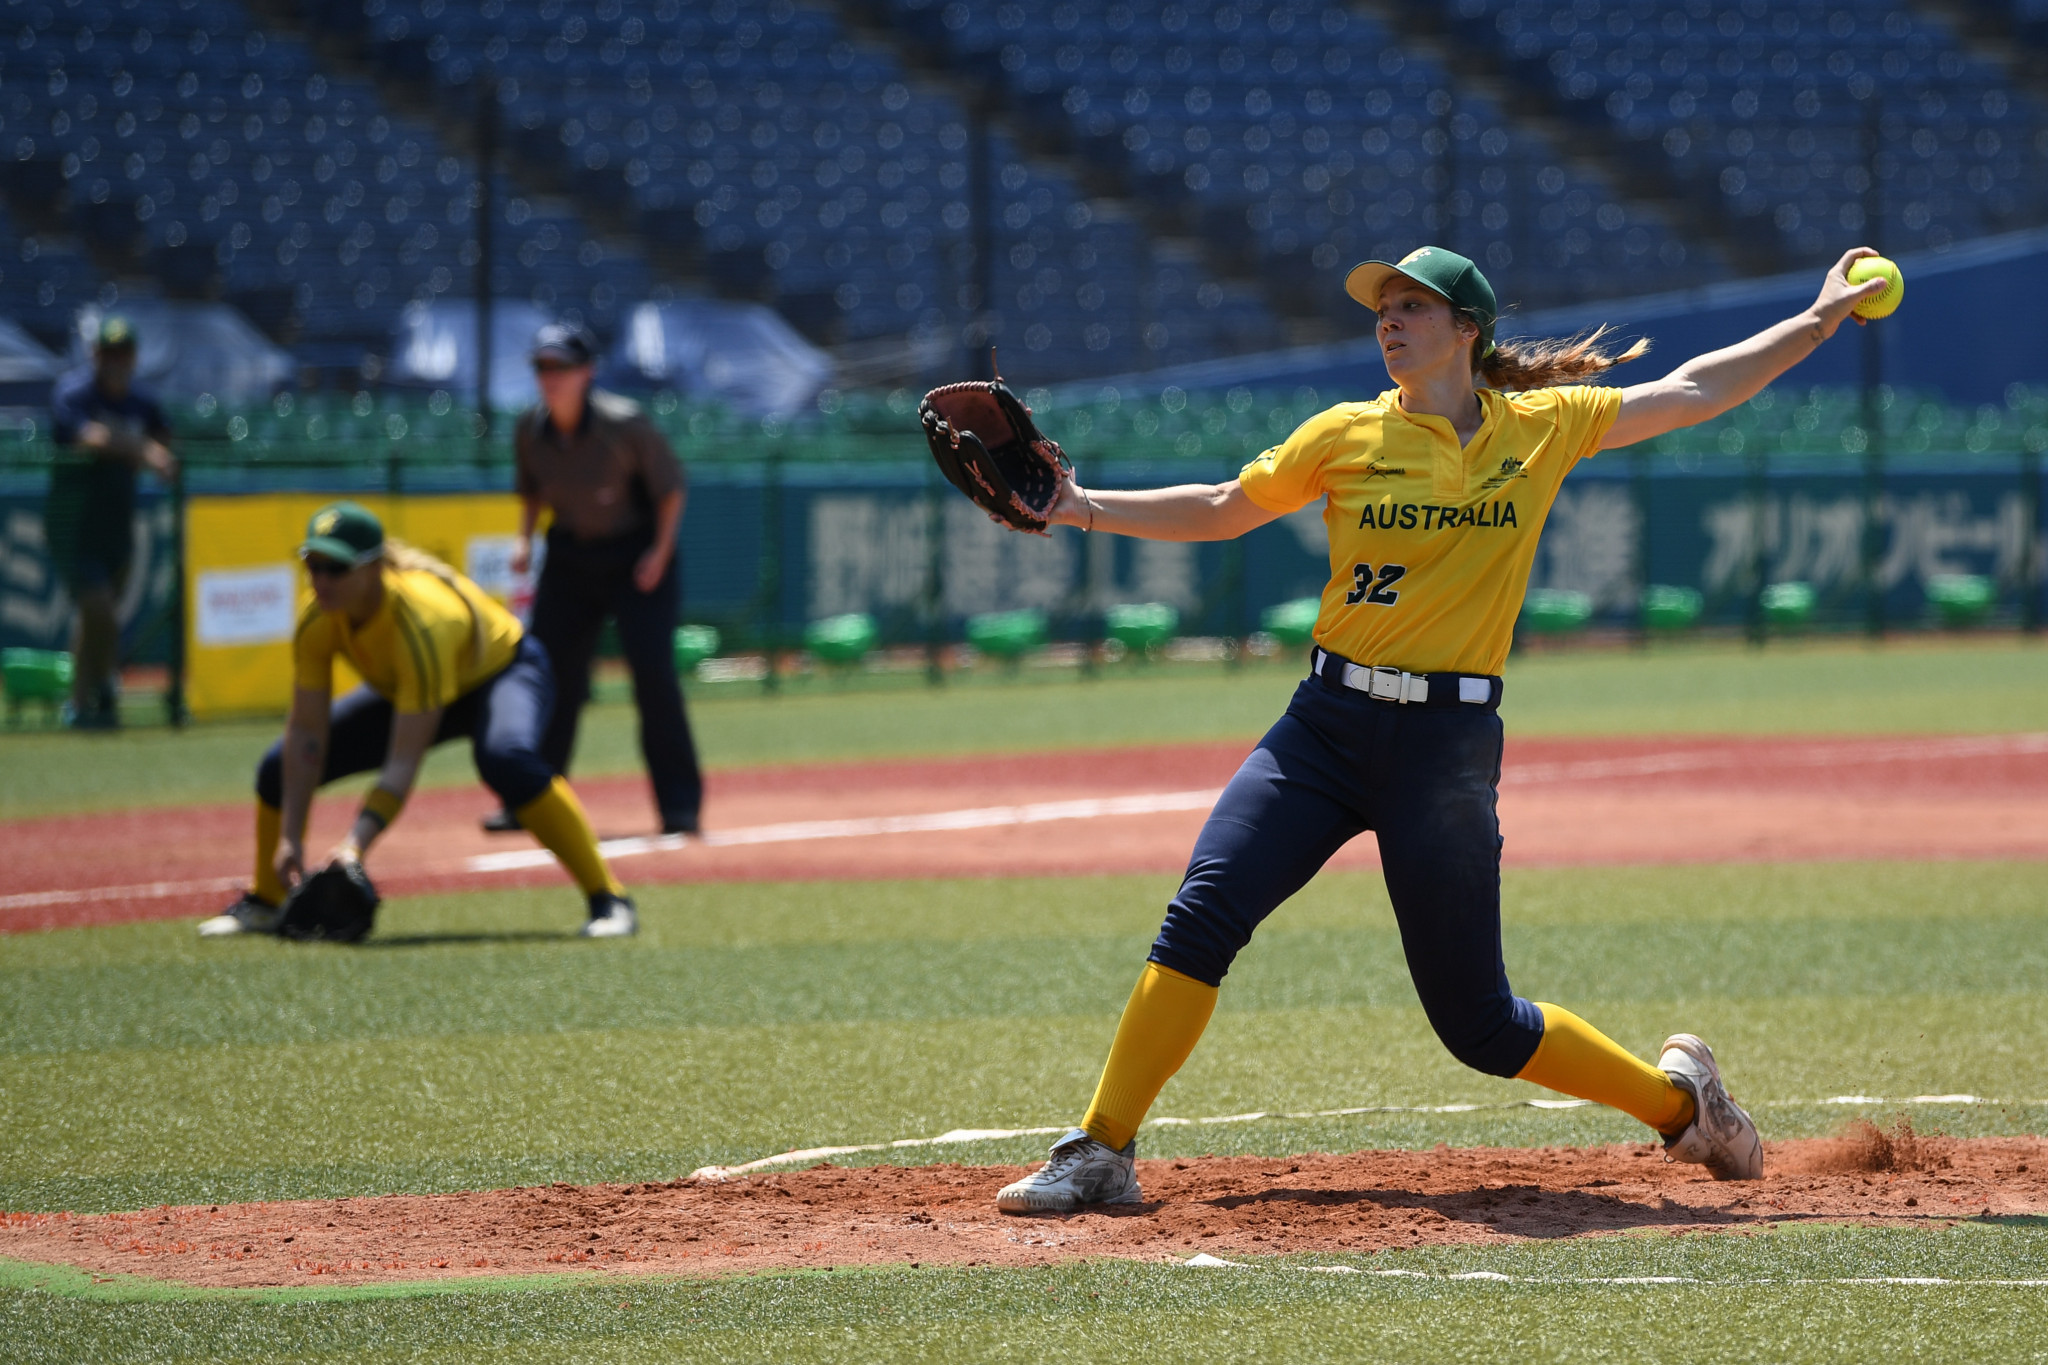 Tickets go on sale for WBSC Women's Softball World Cup Group stages